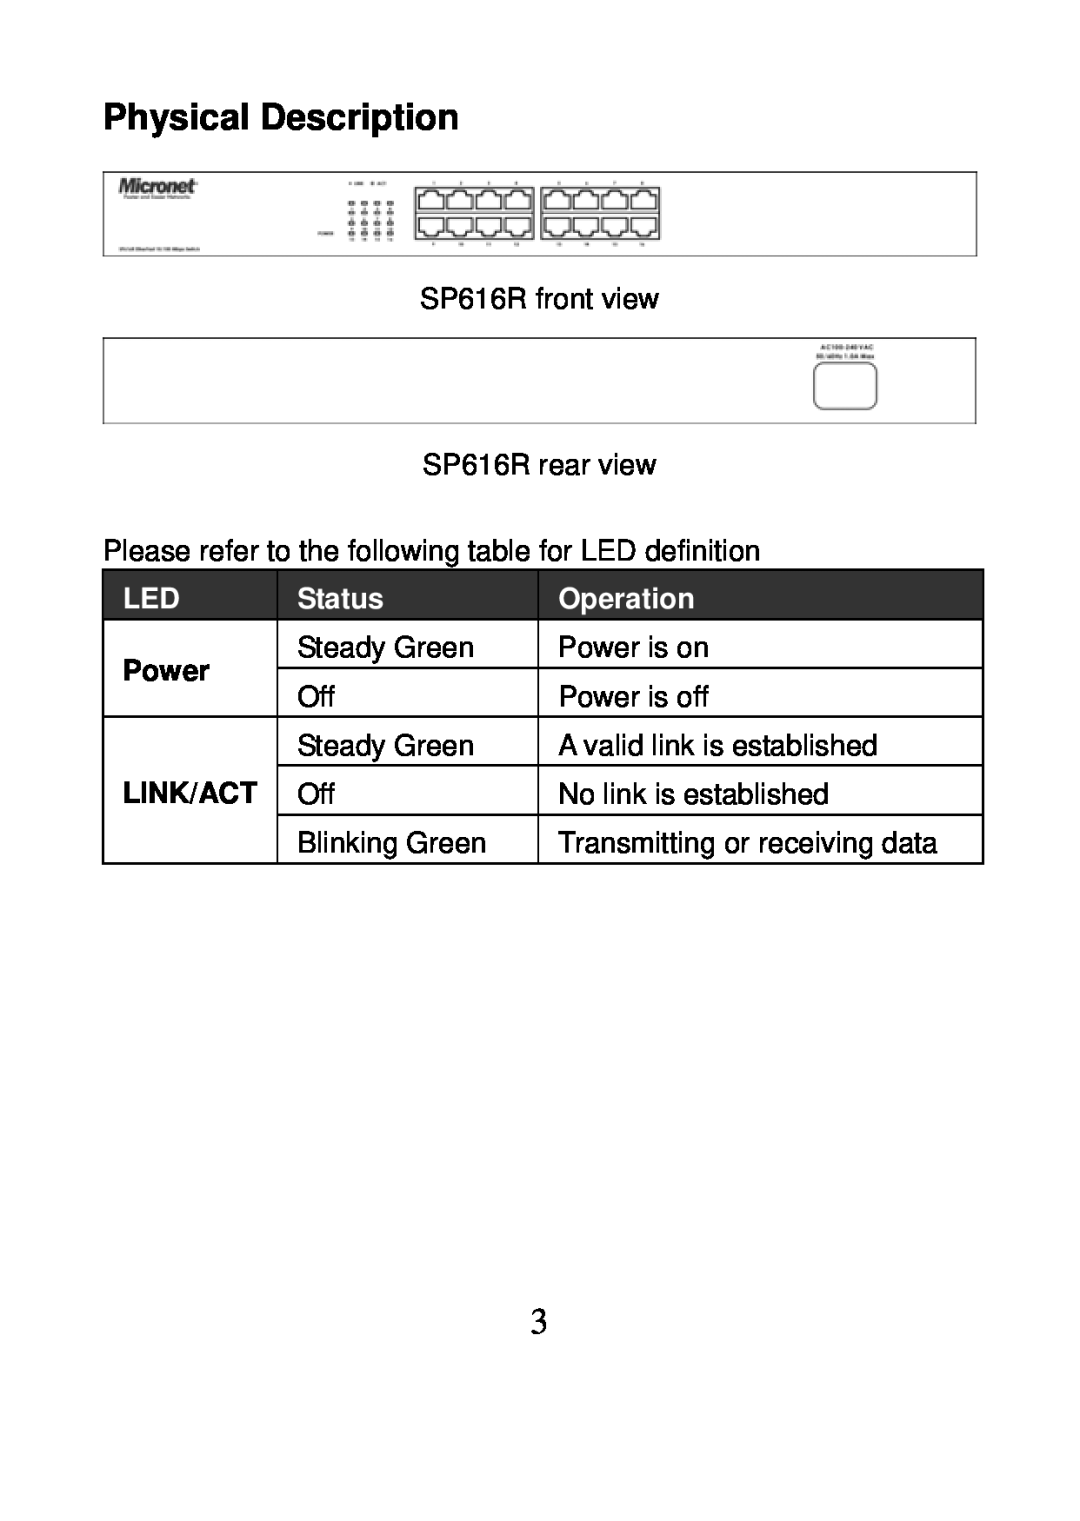 MicroNet Technology SP616R manual Physical Description, Power, Link/Act, Status, Operation 